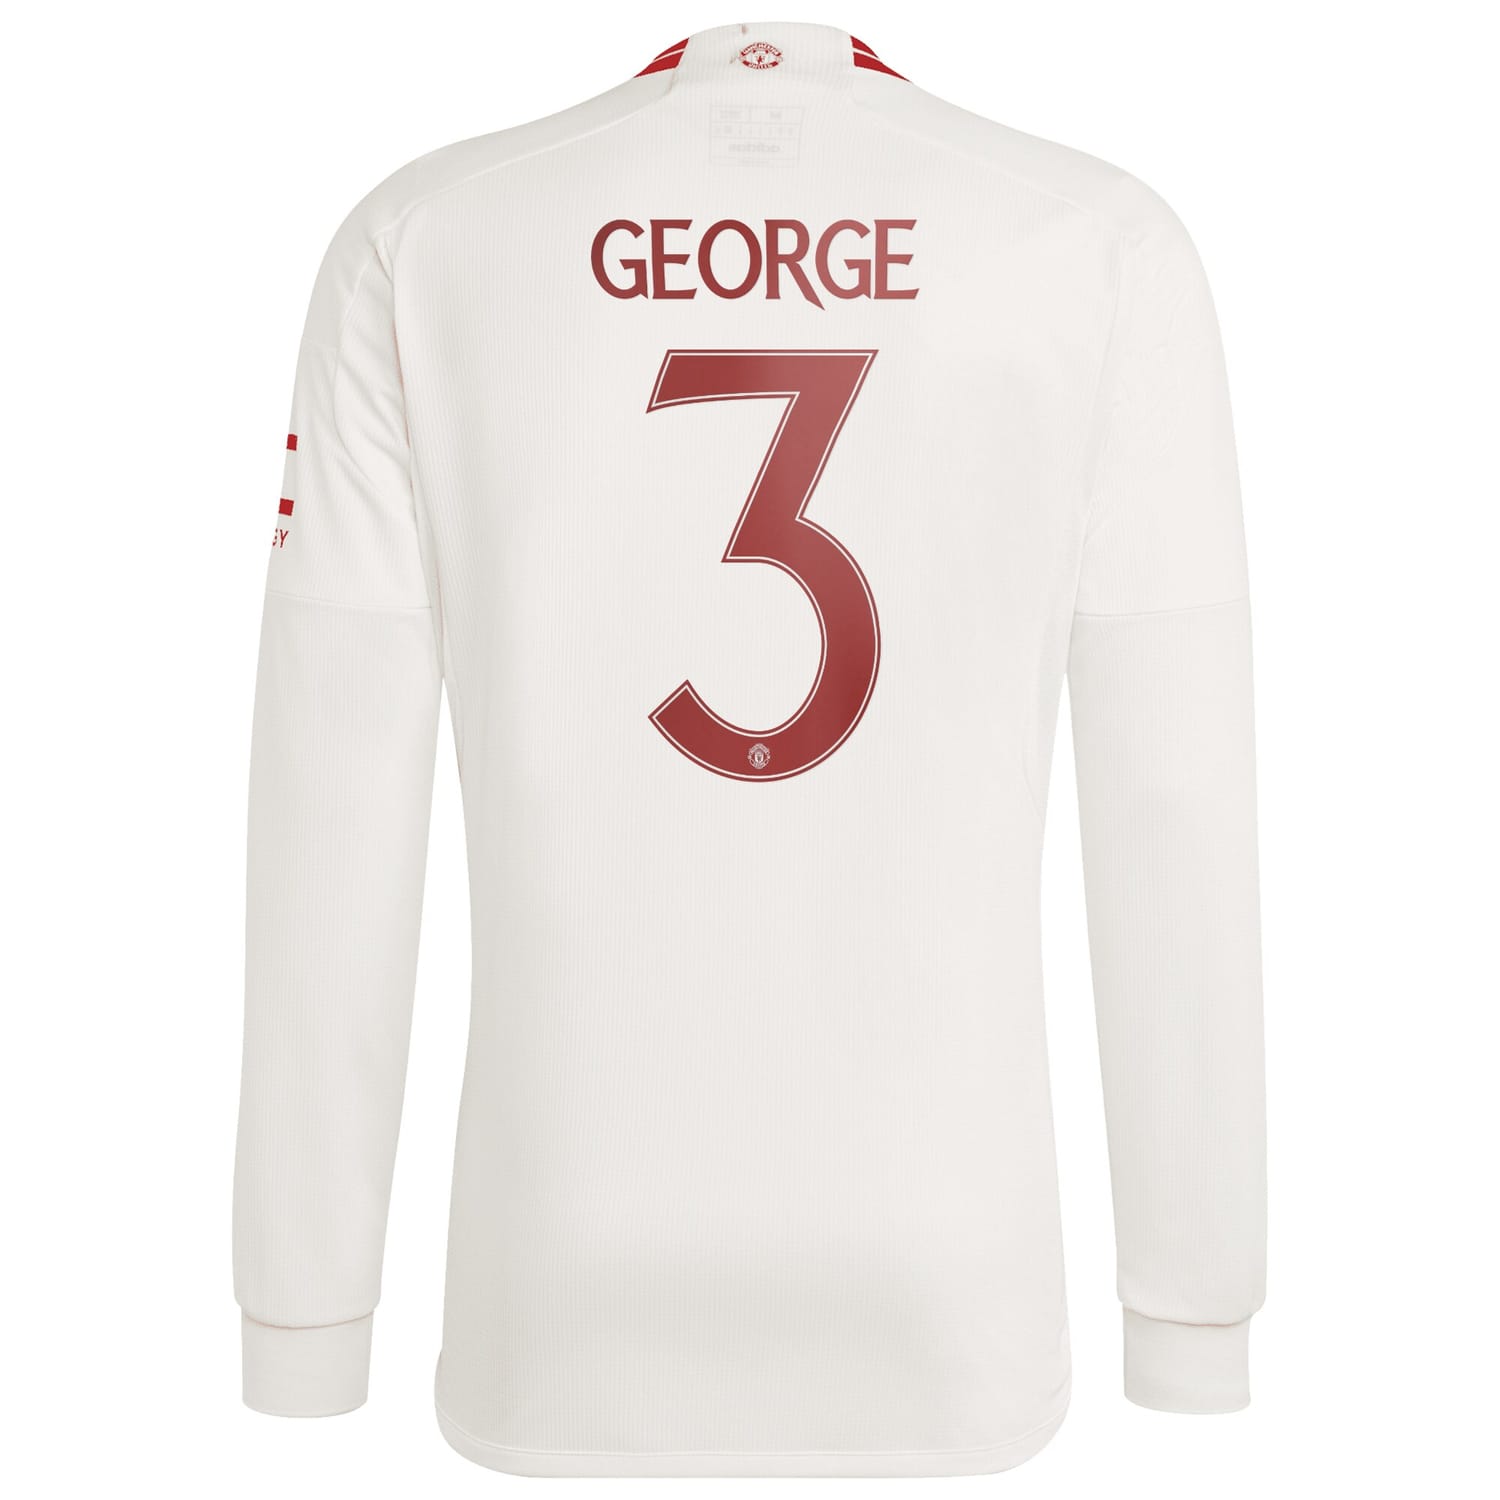 Premier League Manchester United Third Cup Jersey Shirt Long Sleeve 2023-24 player Gabrielle George printing for Men